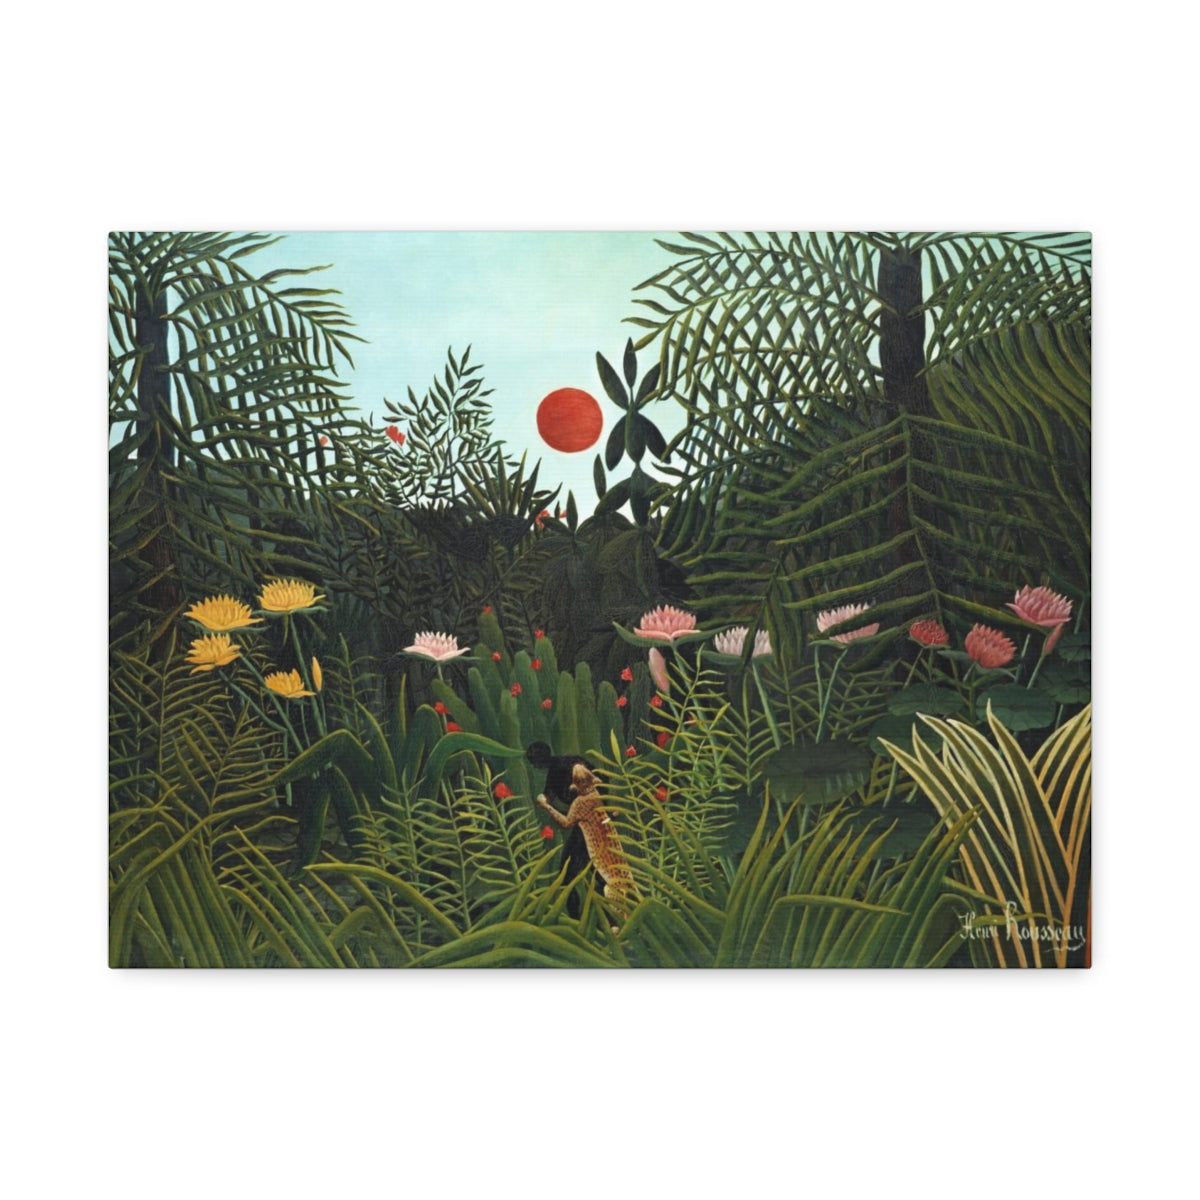 Henri Rousseau's Virgin Forest with Sunset (1910) Satin Canvas, Stretched